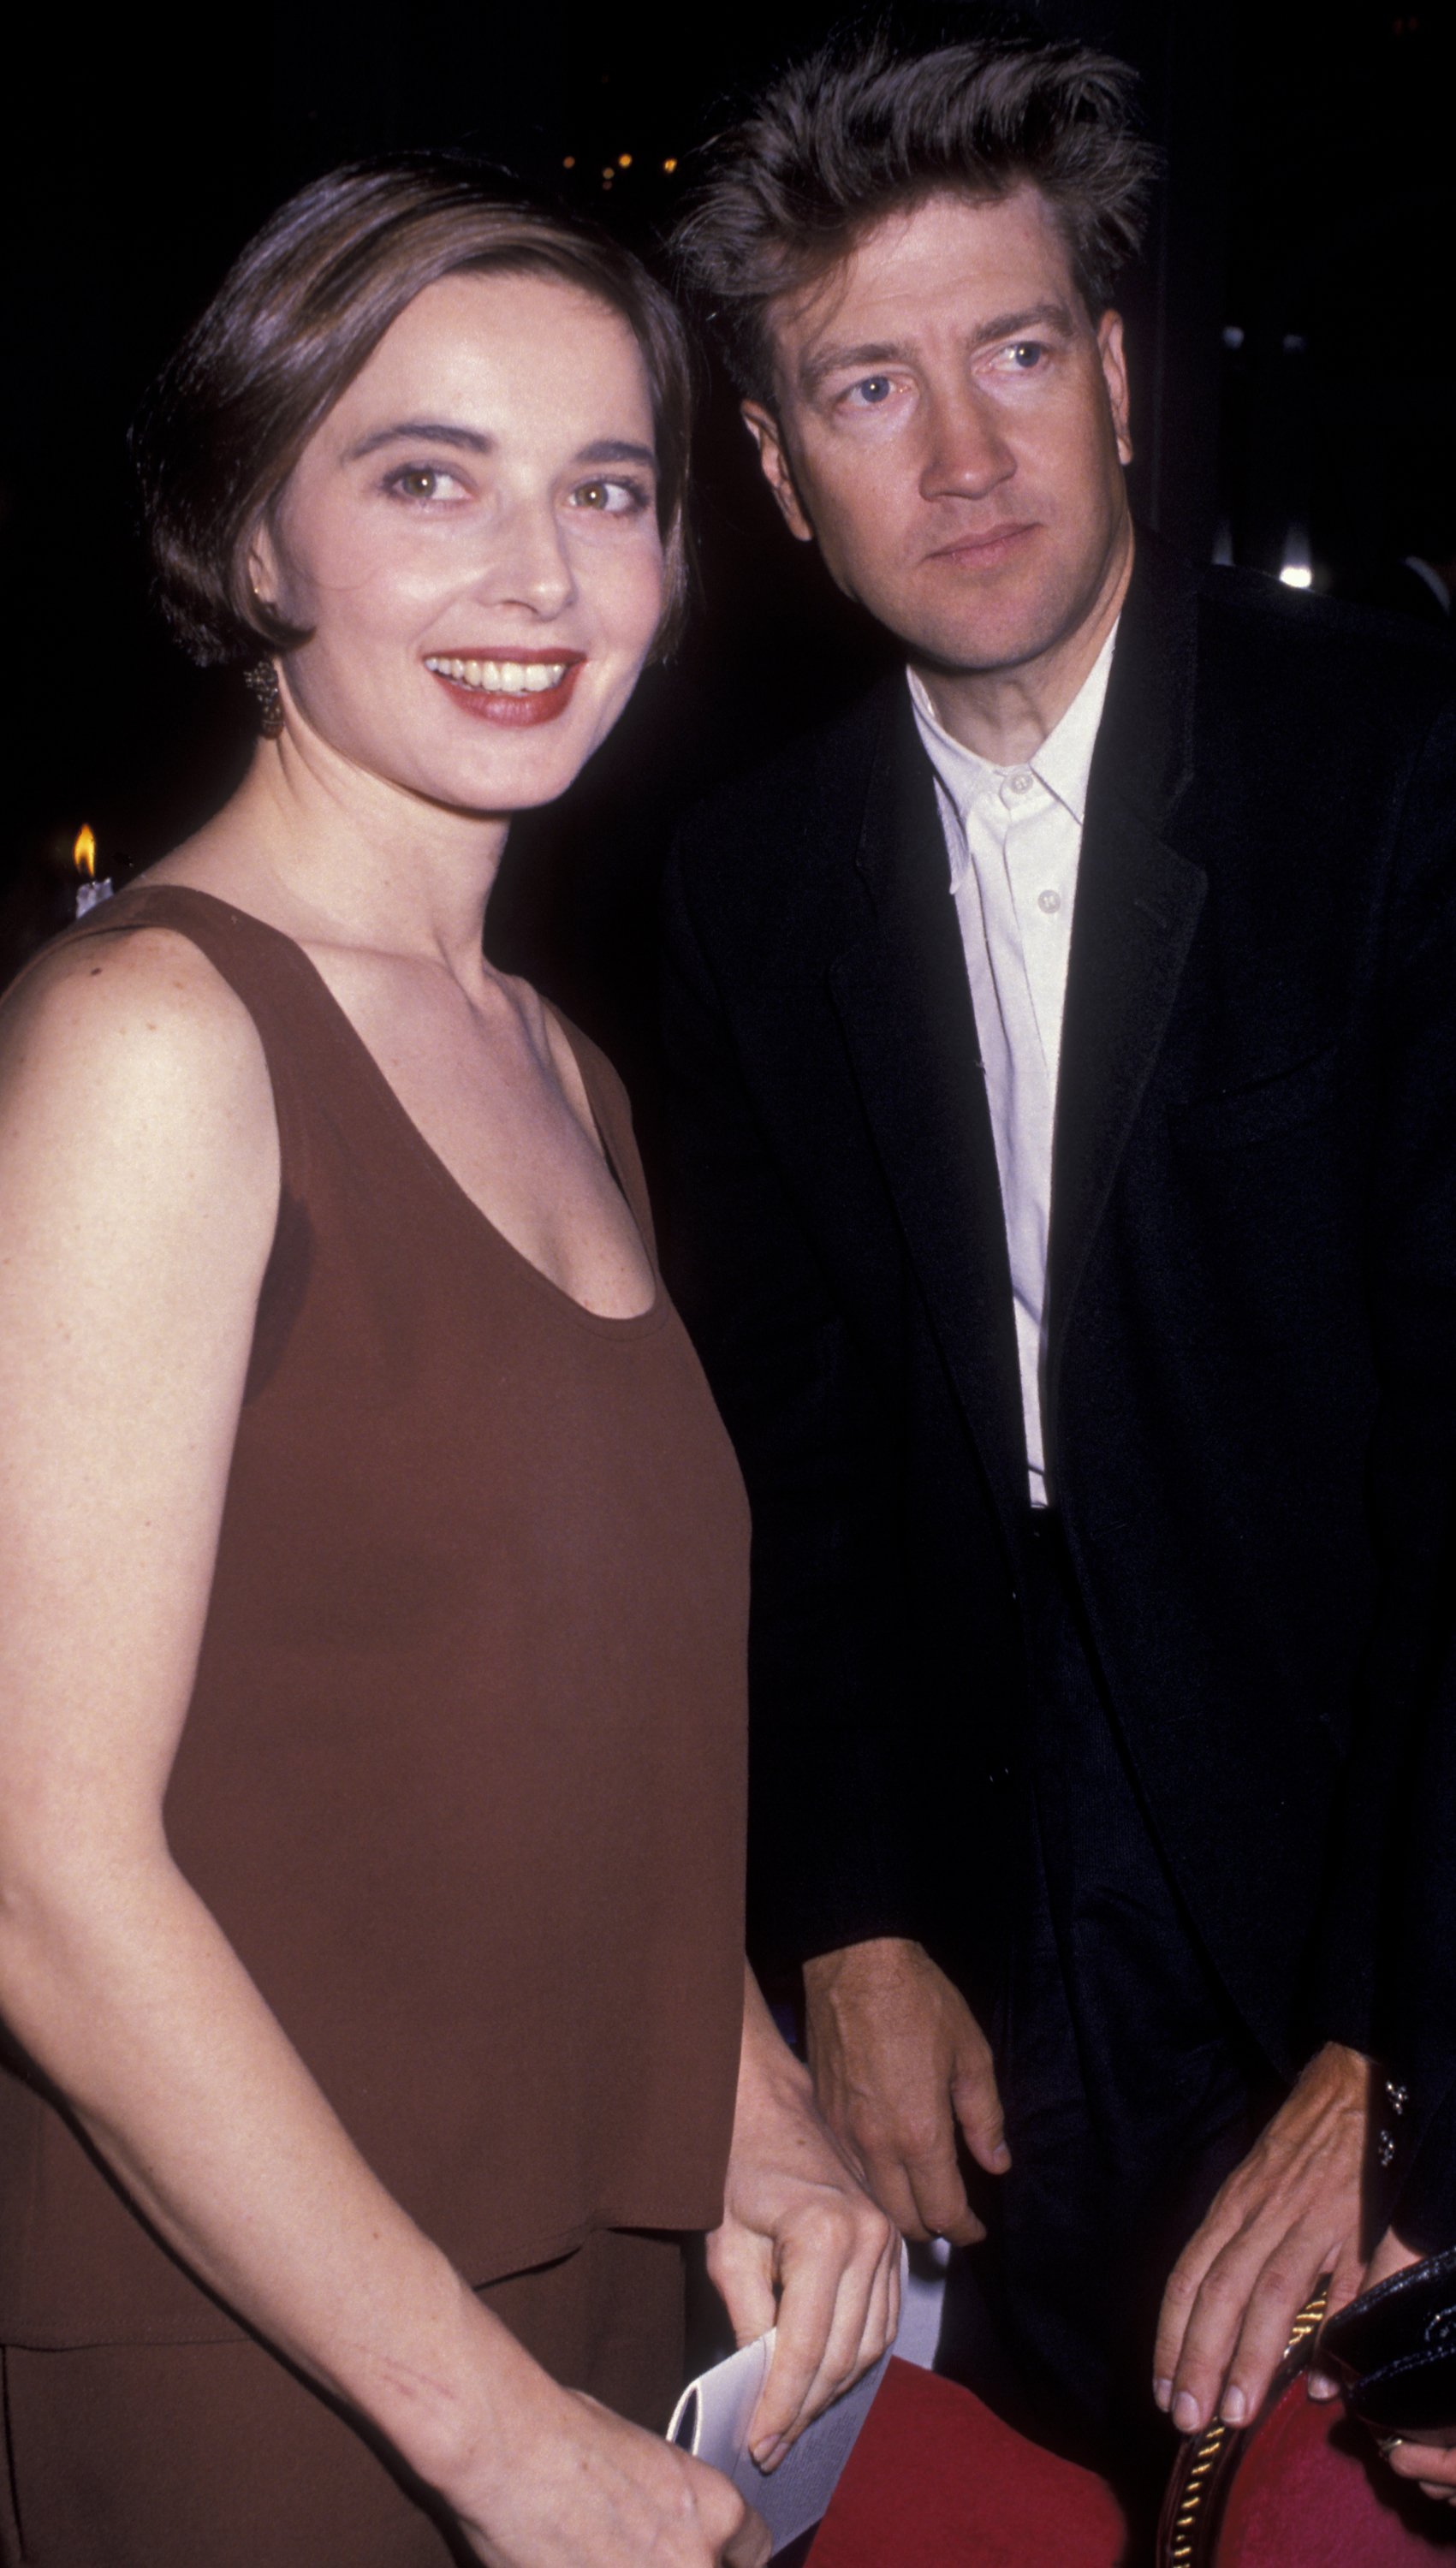 David Lynch and Isabella Rossellini at the Night of 100 Stars Gala in 1989 | Source: Getty Images